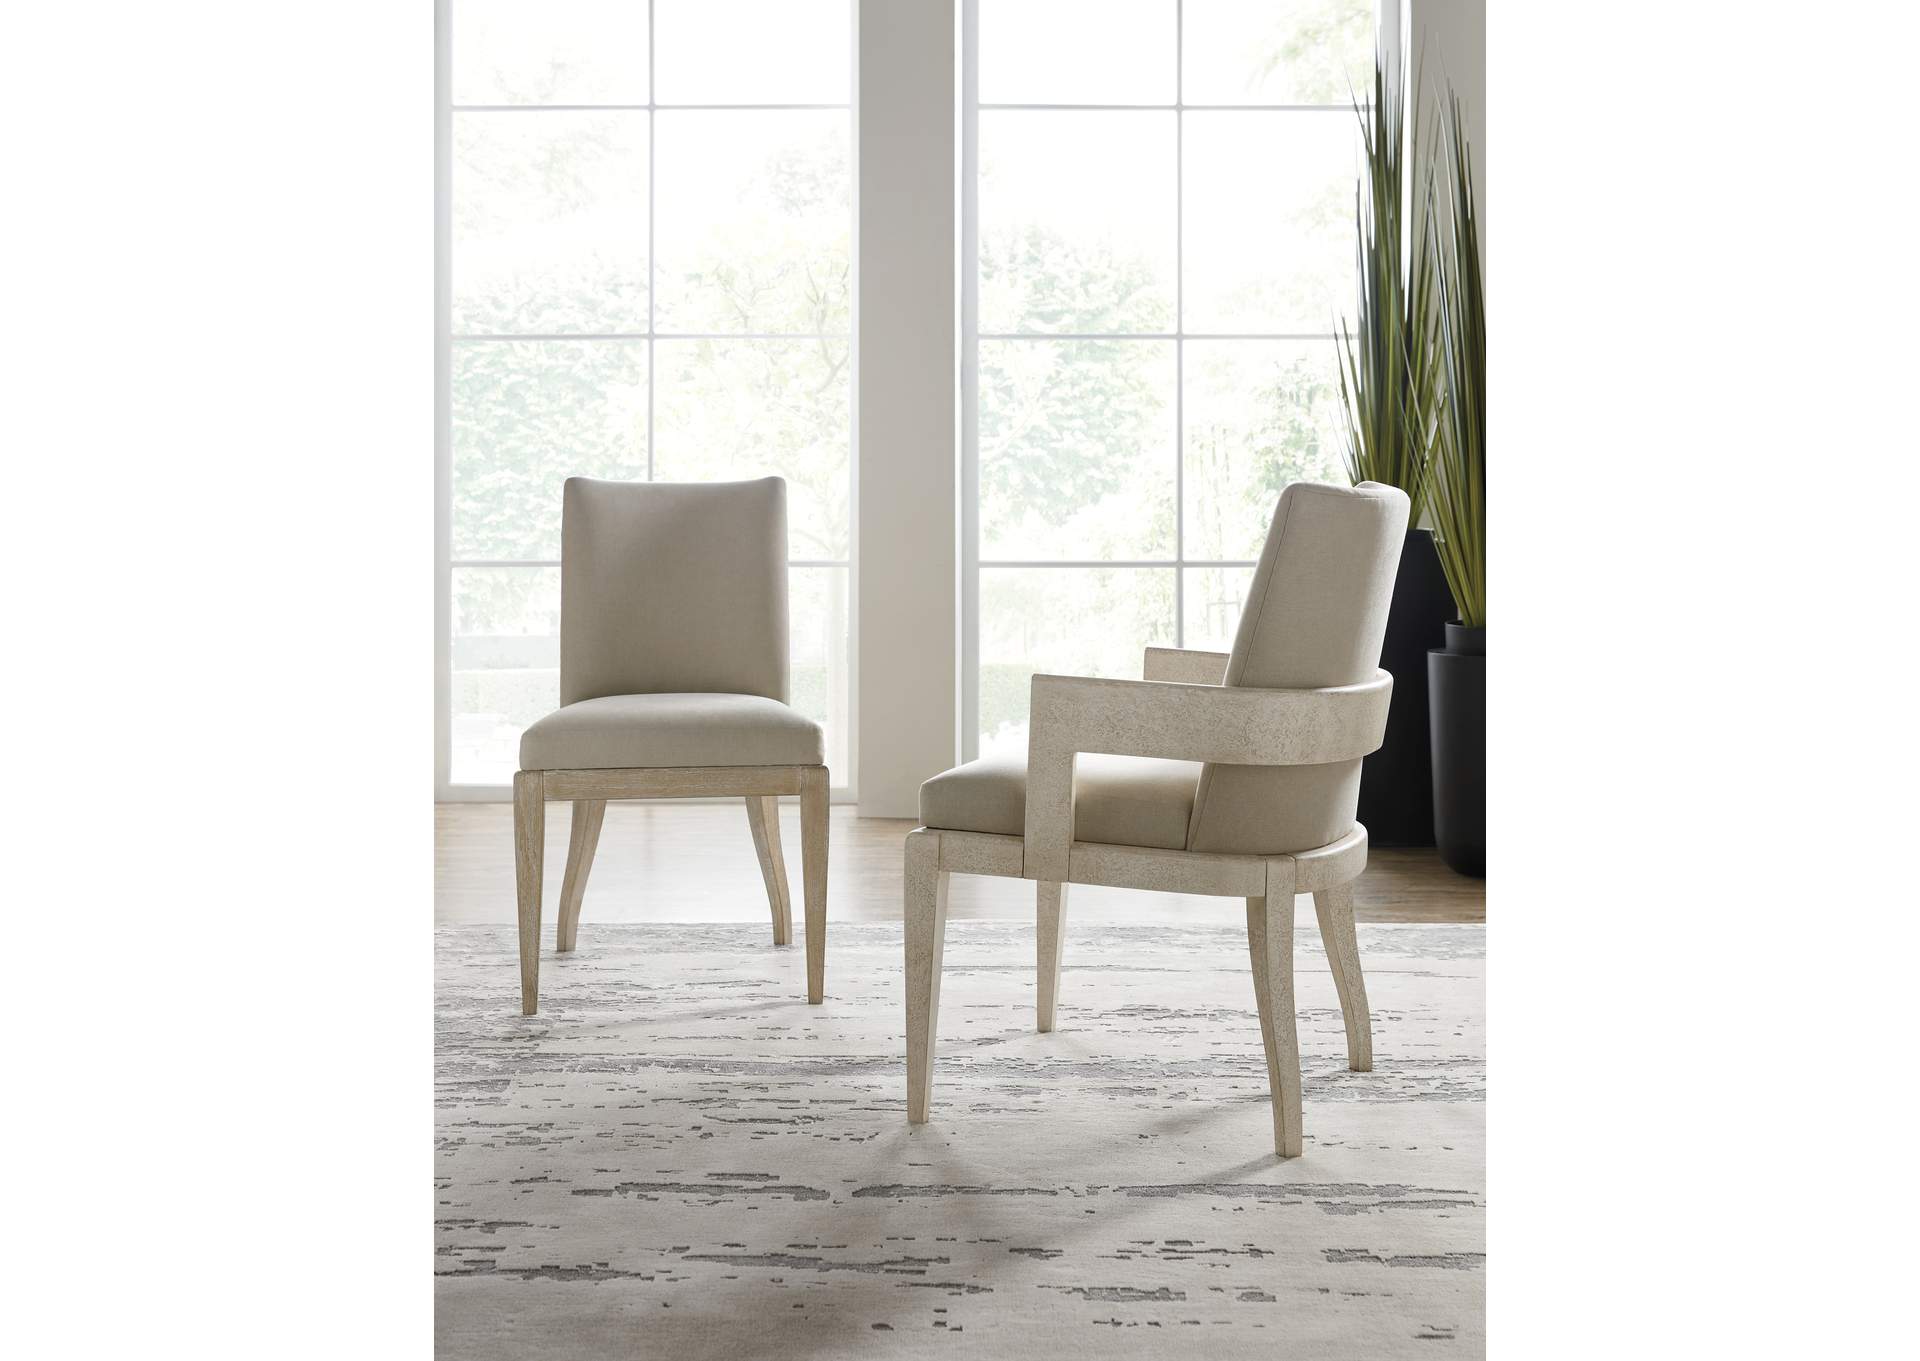 Cascade Upholstered Side Chair 2 Per Carton - Price Ea,Hooker Furniture